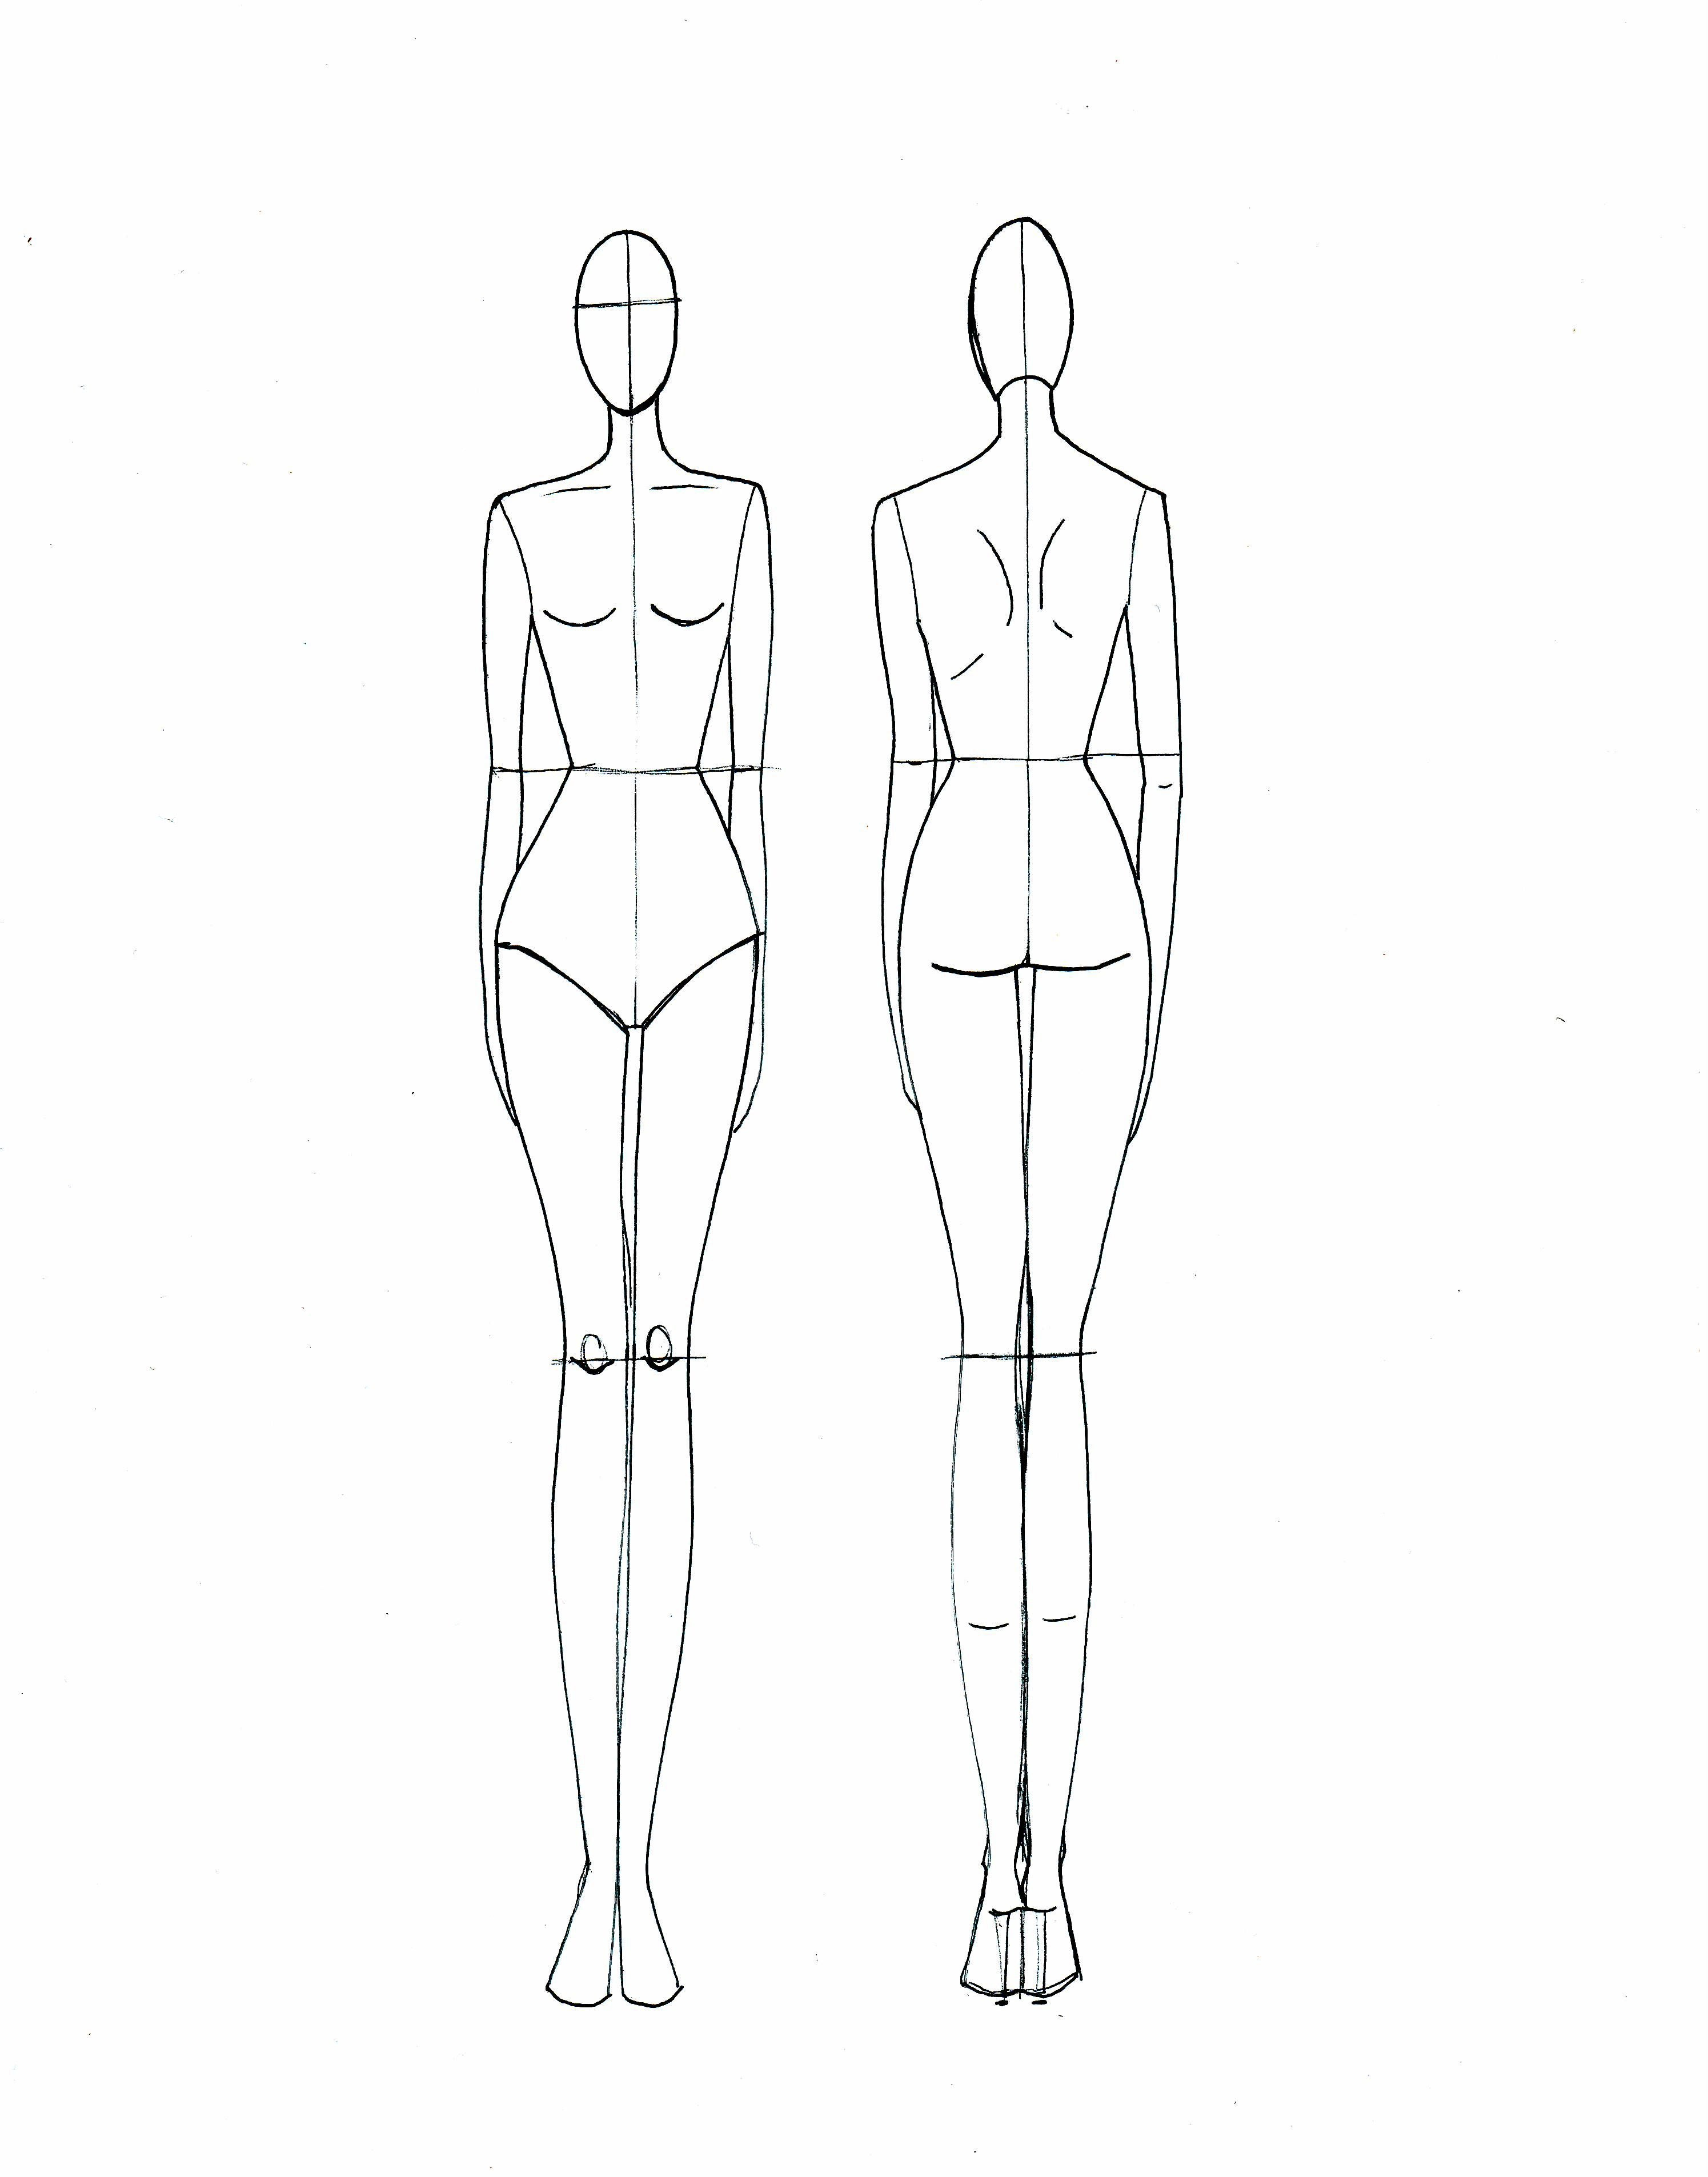 Blank Fashion Design Models  Projects To Try  Fashion Design within Blank Model Sketch Template